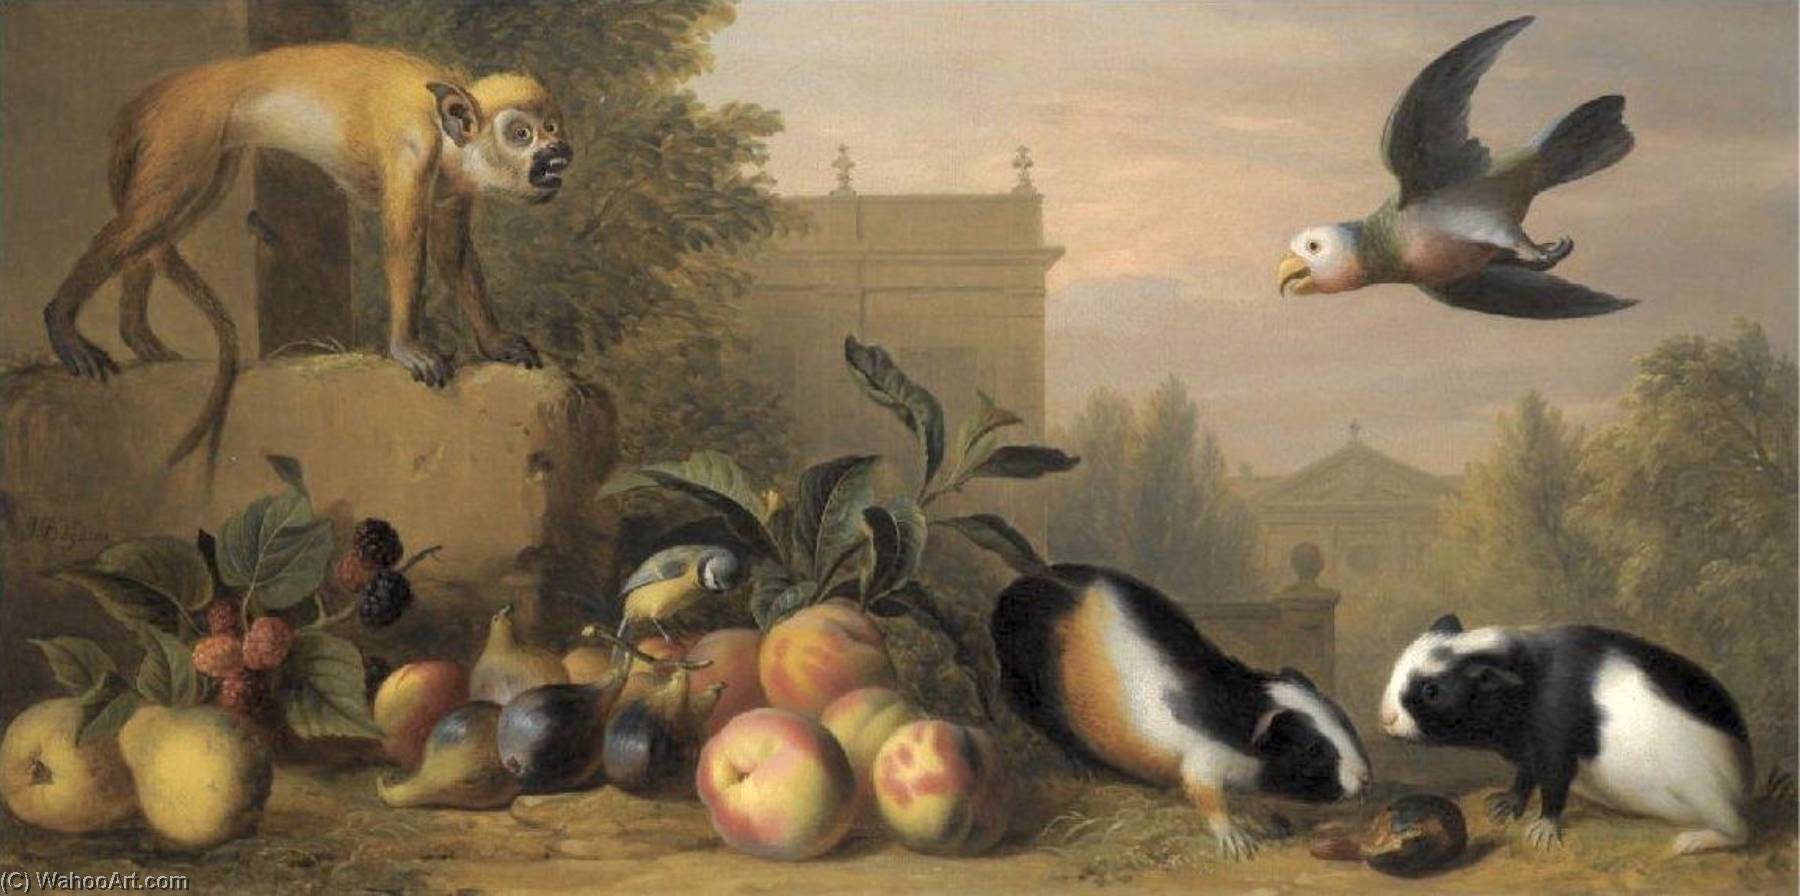 Wikioo.org - สารานุกรมวิจิตรศิลป์ - จิตรกรรม Jakob Bogdani - Capuchin squirrel monkey, two guinea pigs, a blue tit and an Amazon St. Vincent parrot with Peaches, Figs and Pears in a landscape